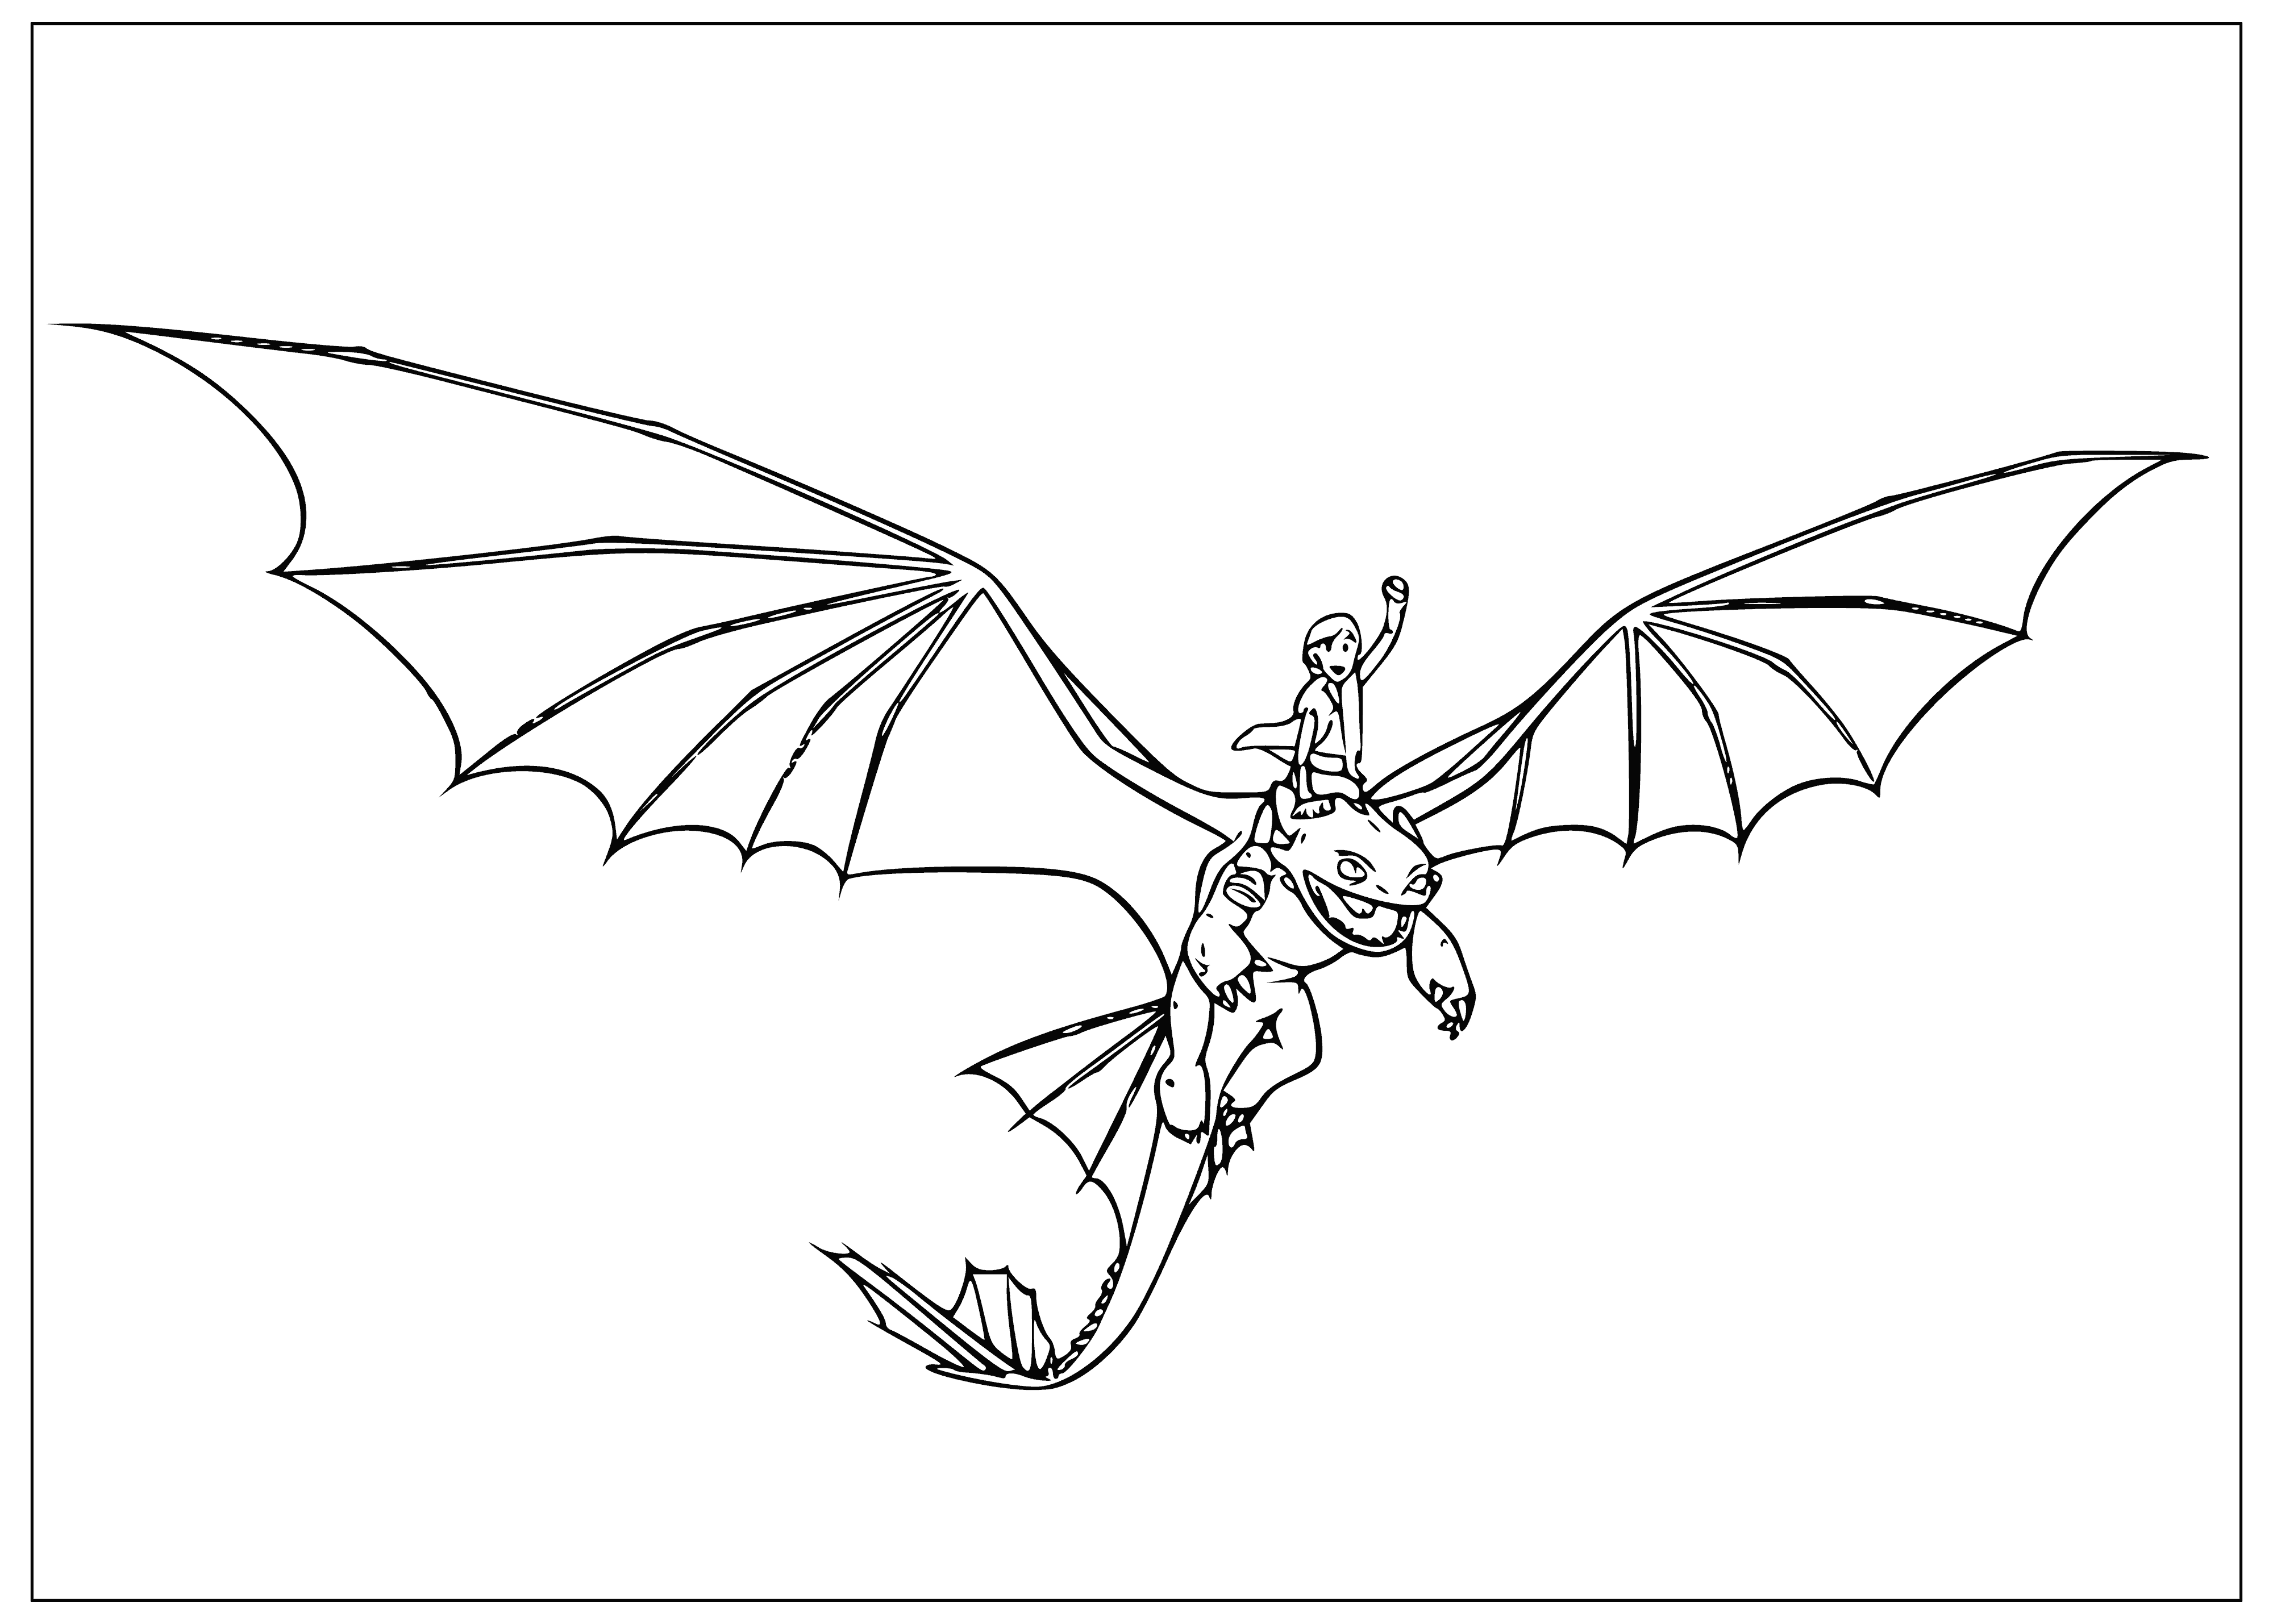 coloring page: A Red Dragon and its companions are in the center of a coloring page. They all have open mouths, and people are running away/preparing to fight them.